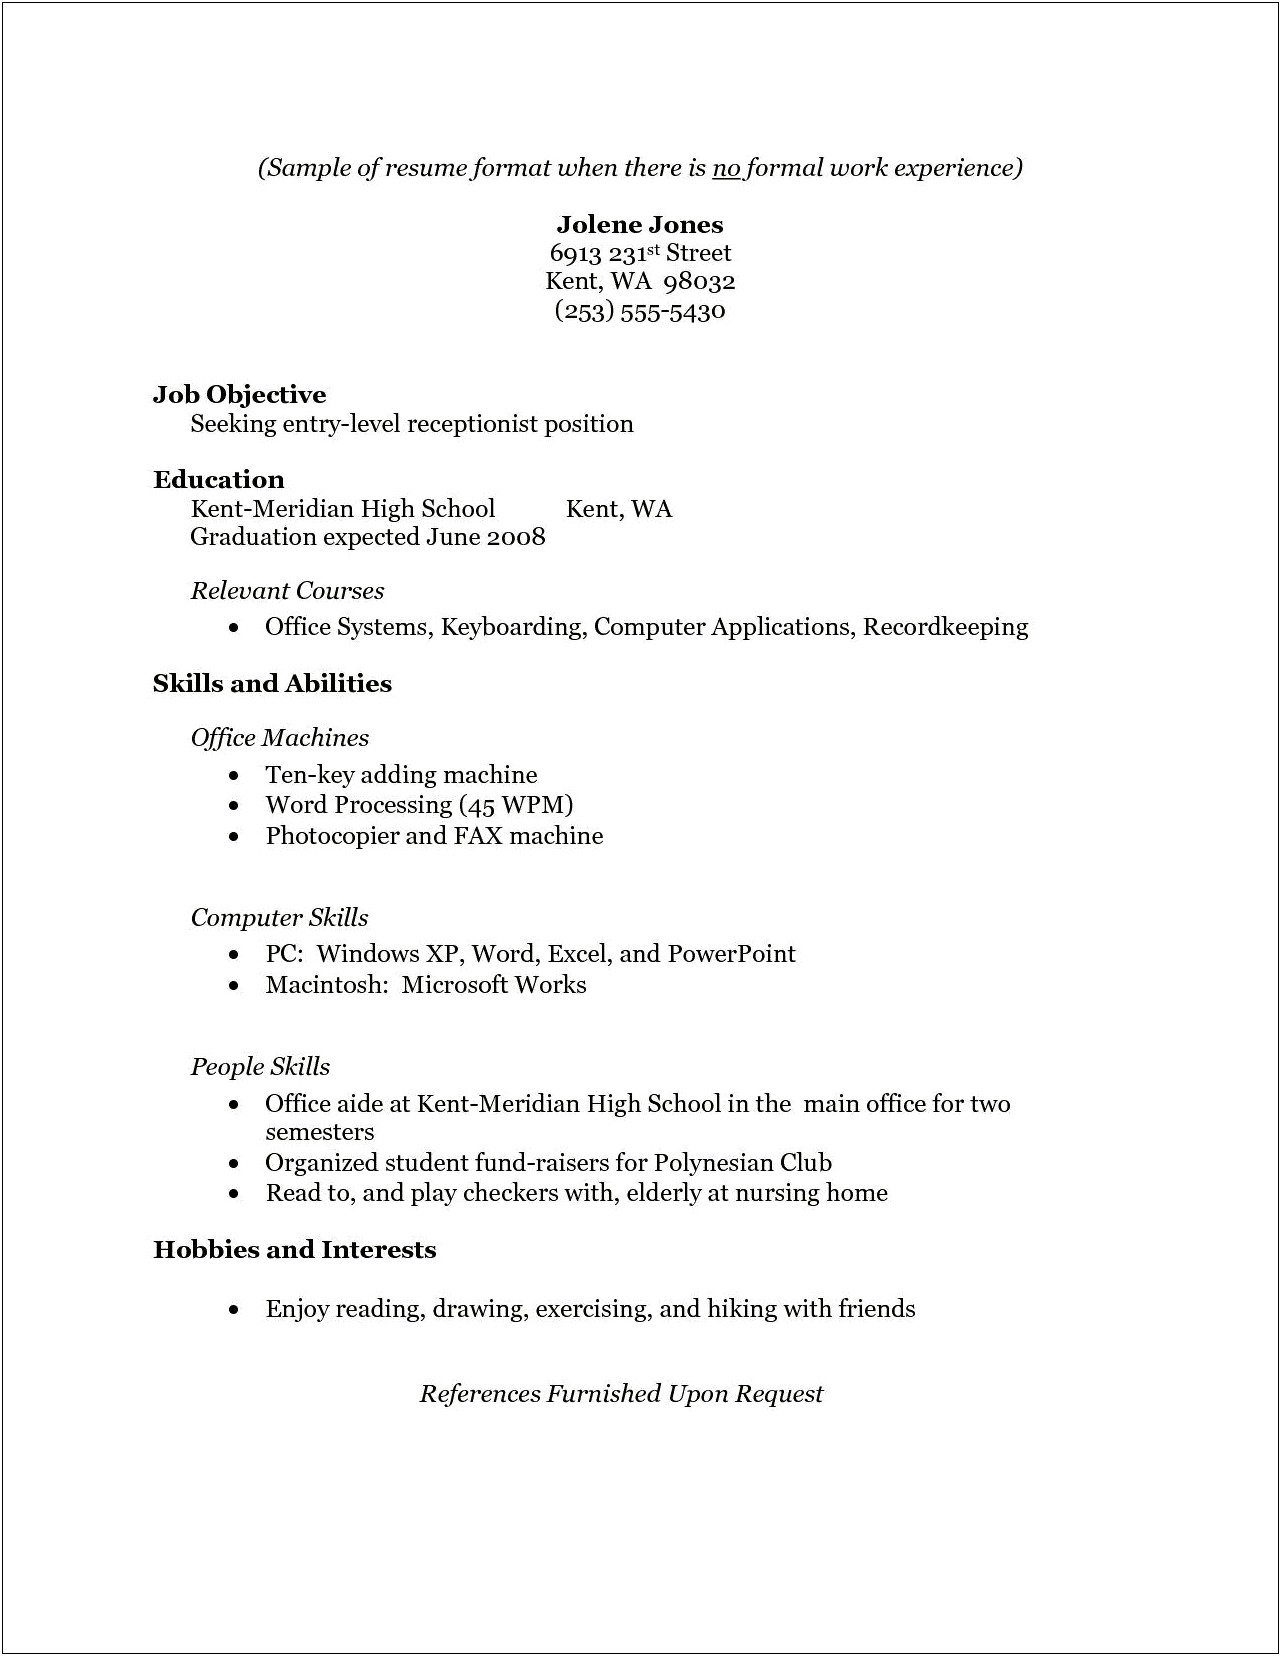 Resume For Someone With Limited Work Experience